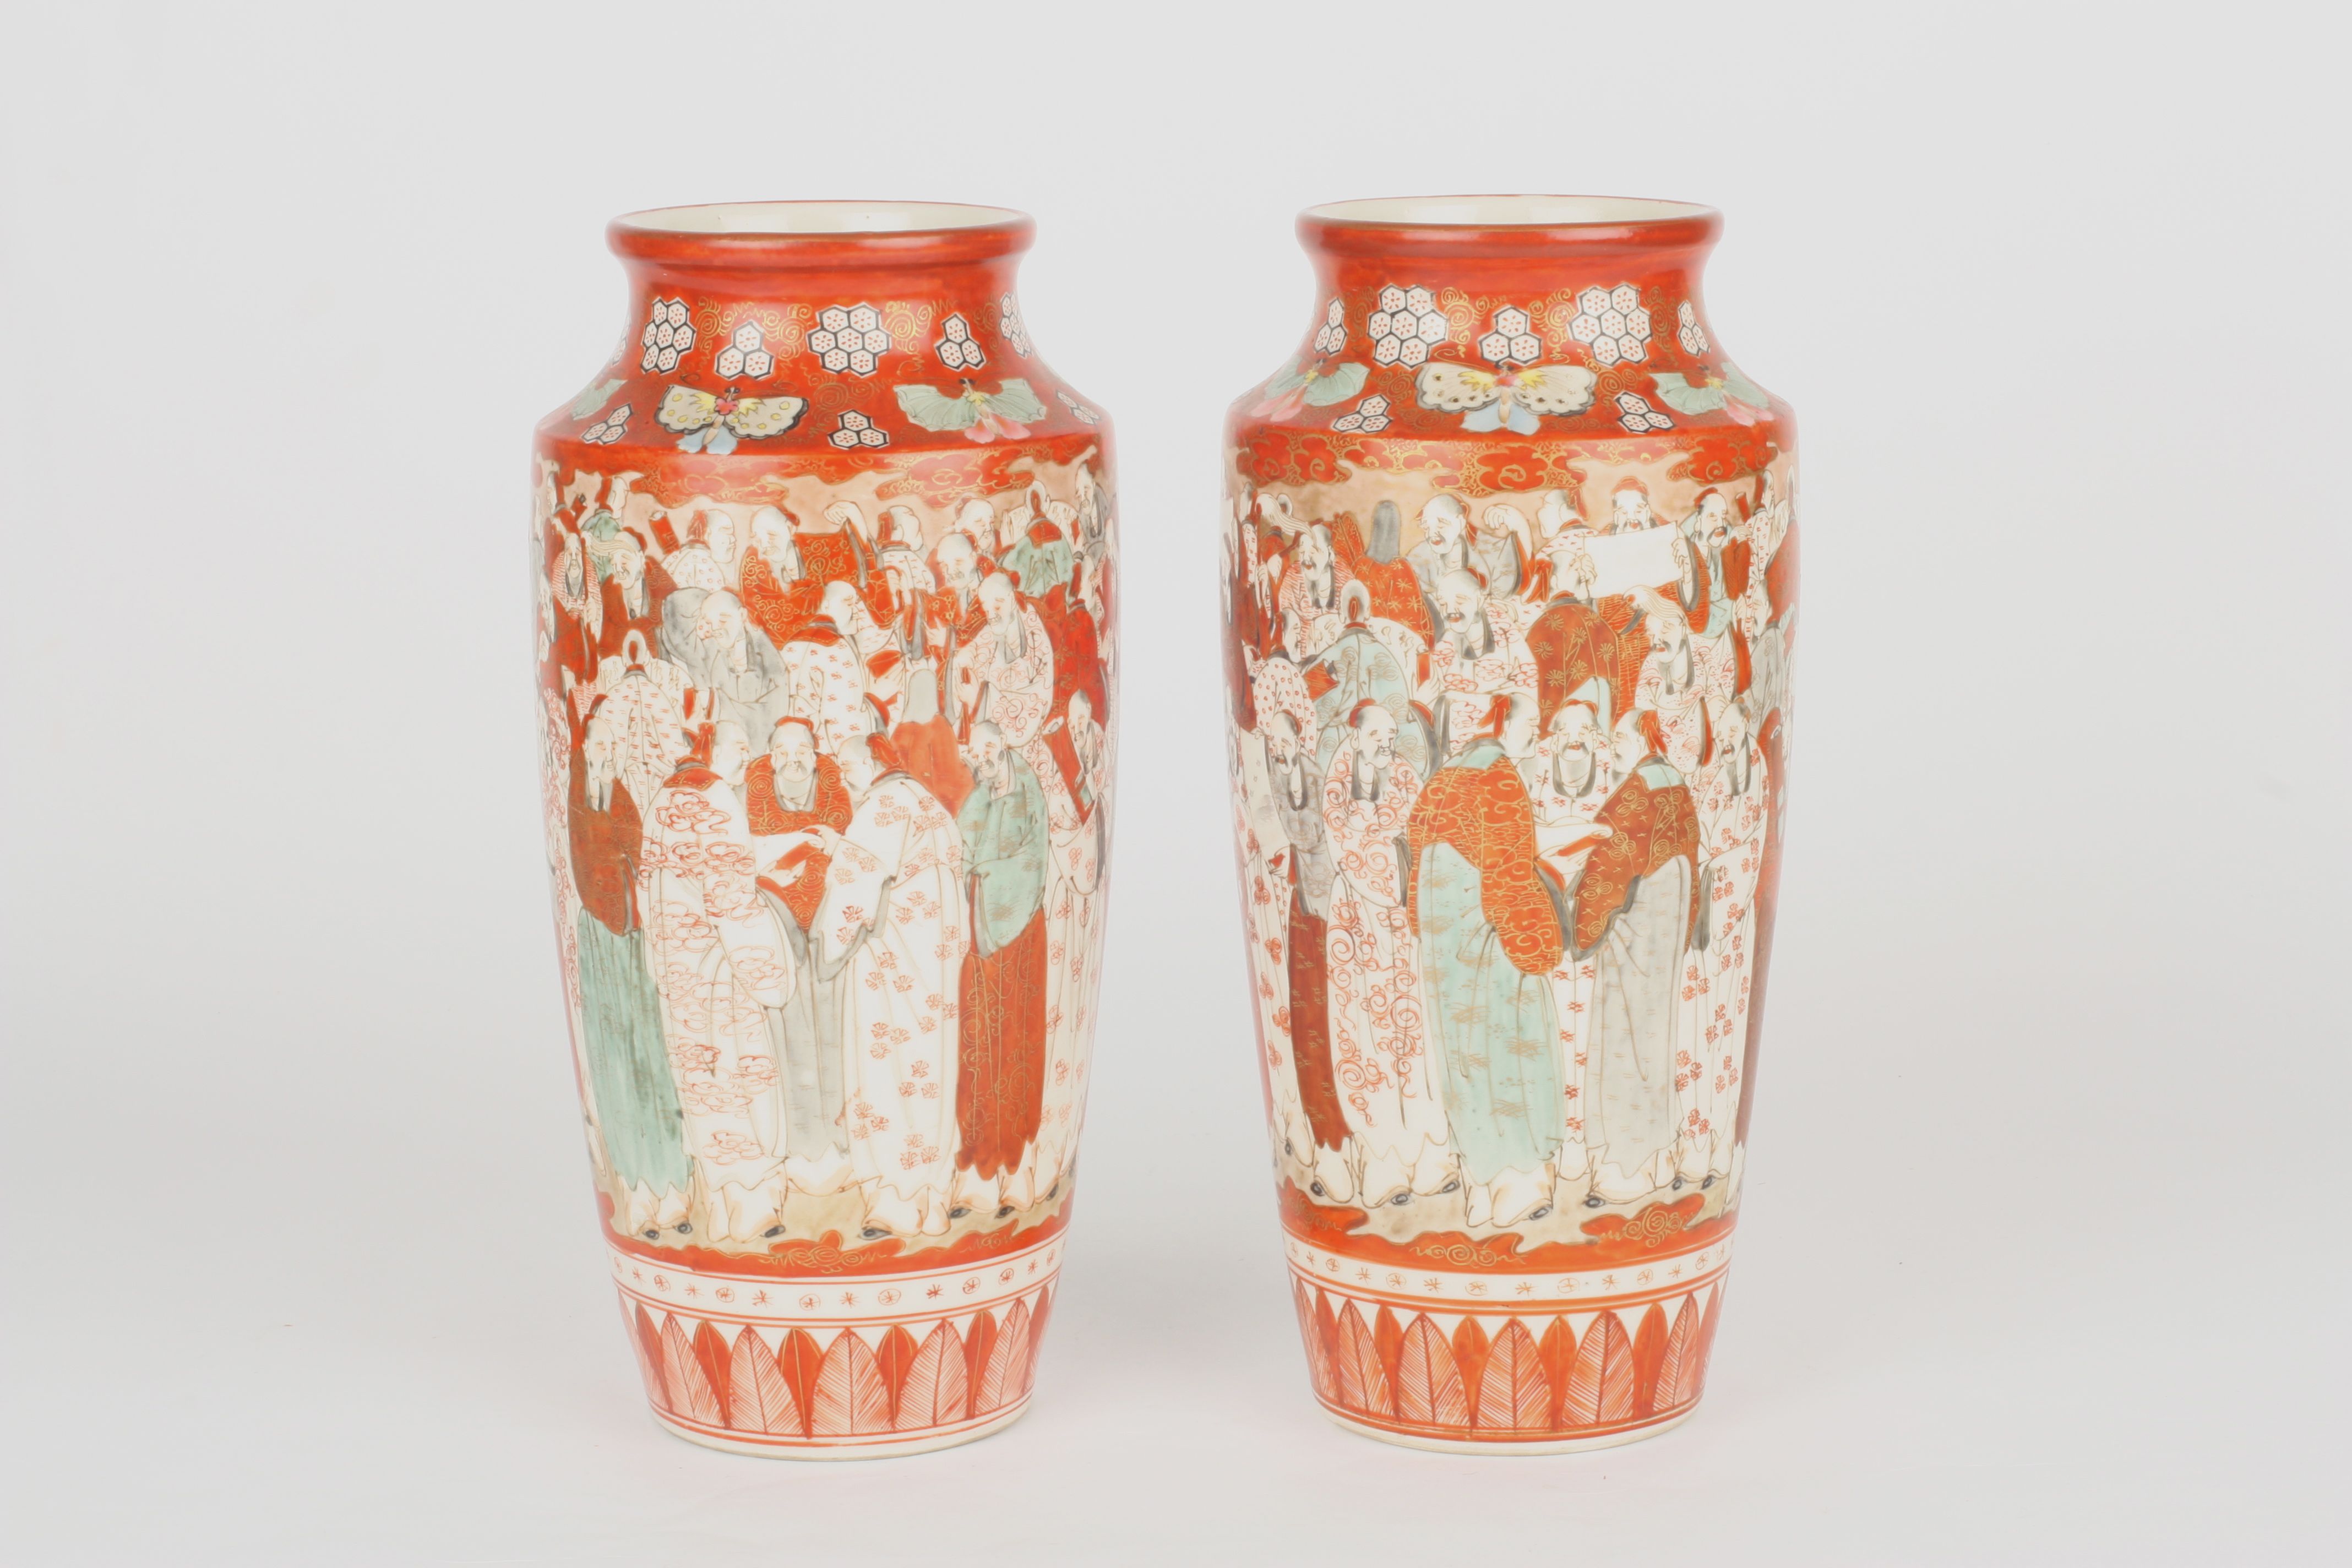 A pair of Japanese Kutani porcelain vases, circa 1900, of ovoid form, painted with a scholars